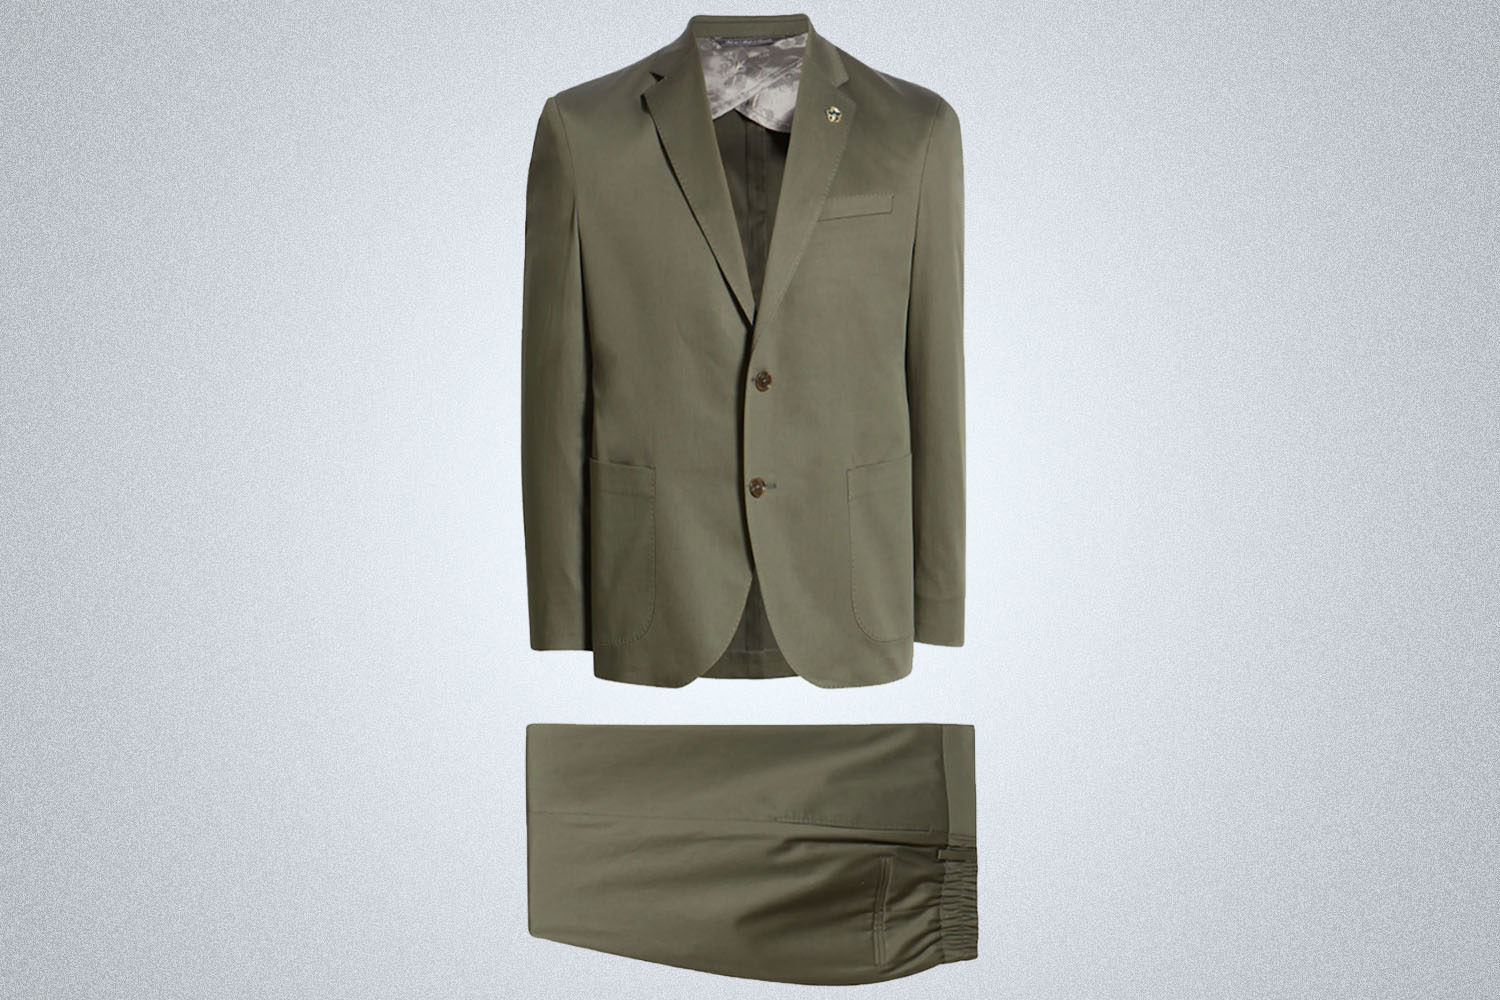 a green cotton suit from Ted Baker London on a grey background